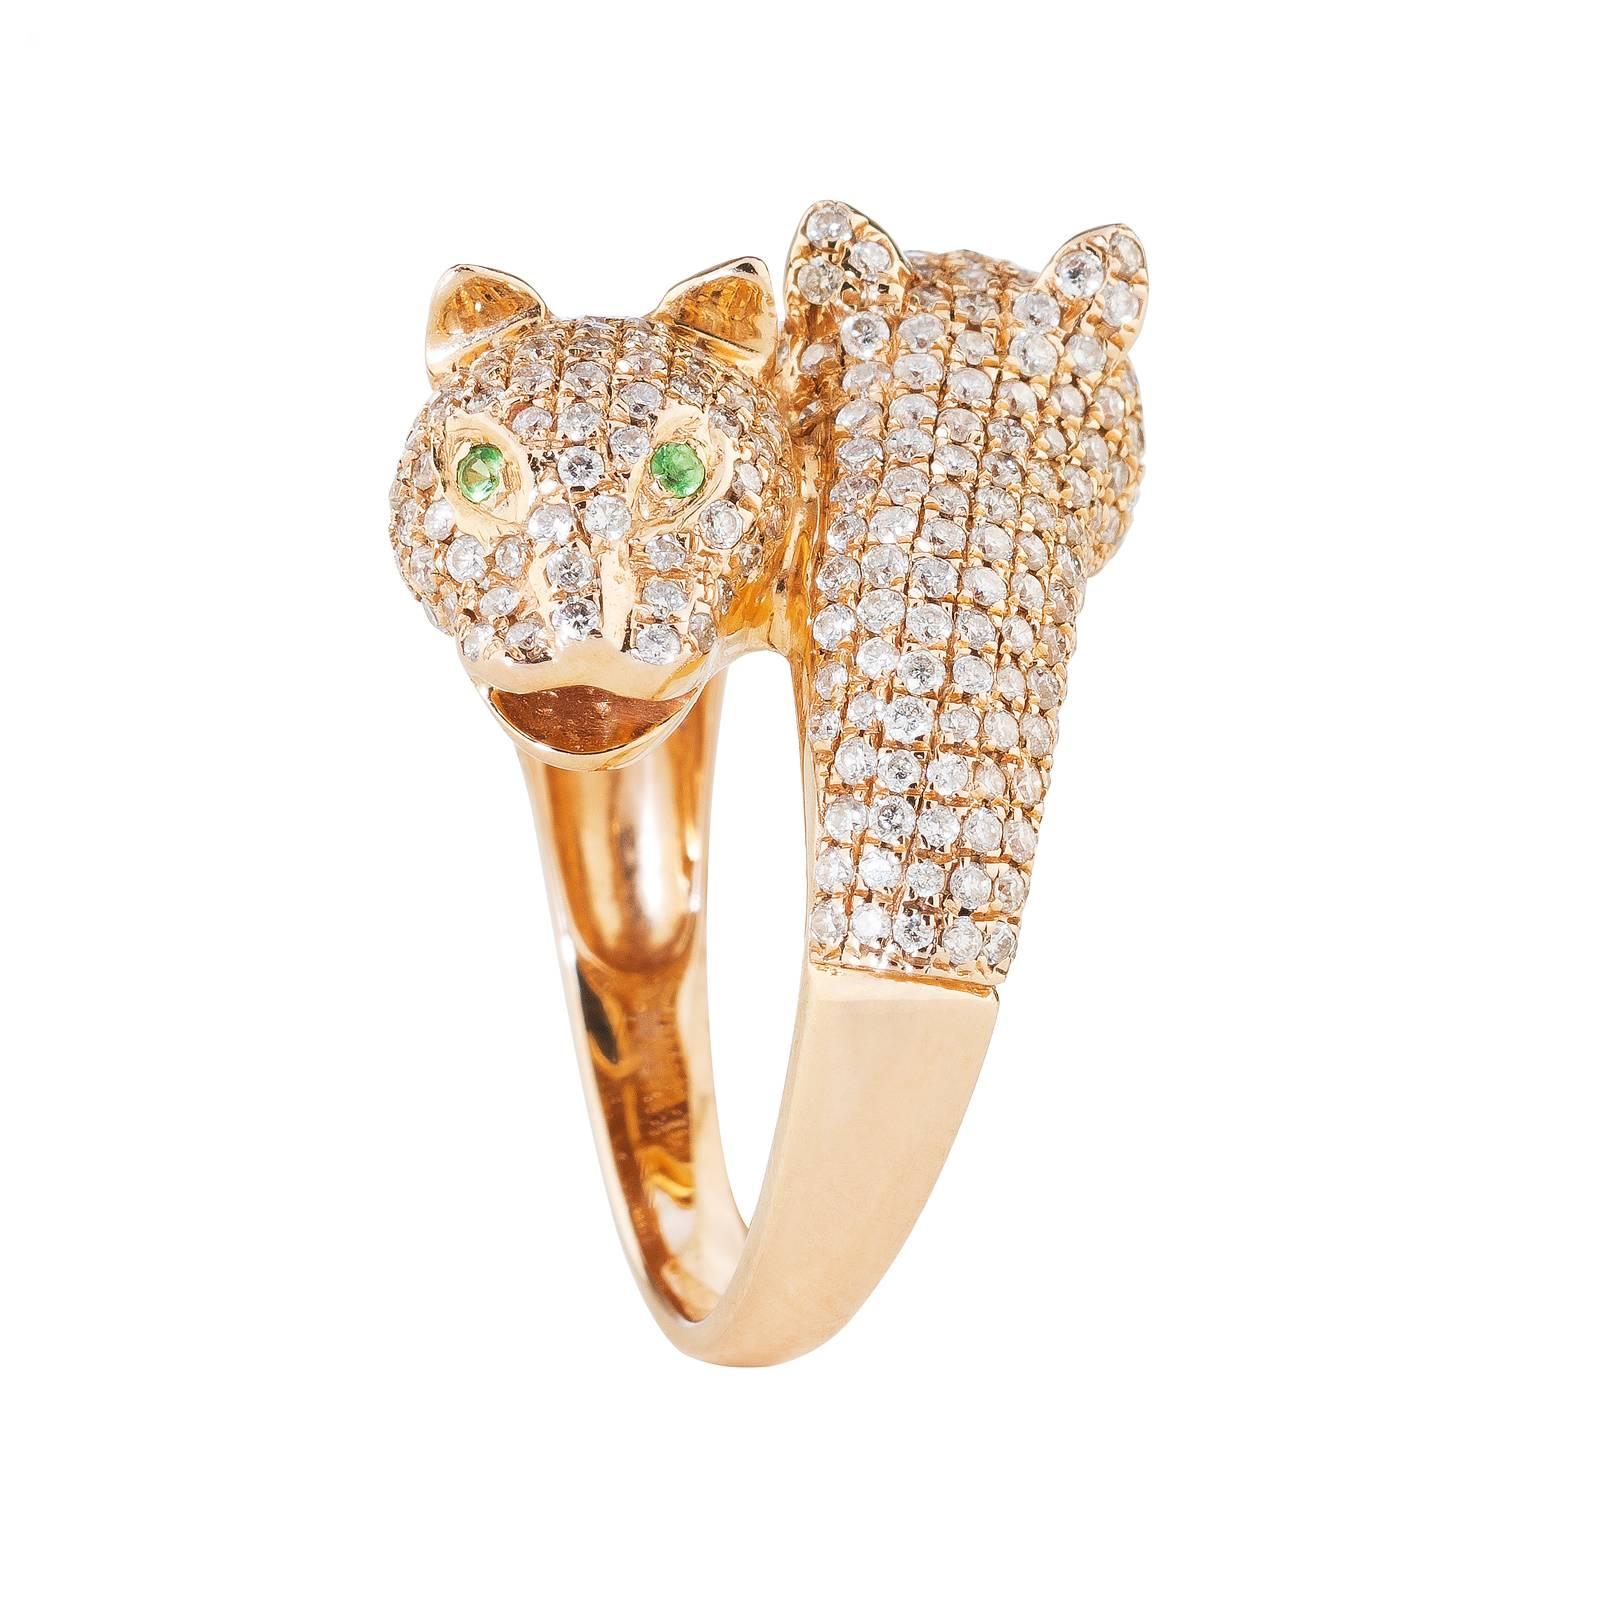 The Ring RUPERT is inspired by the art deco. The two panther stand symbolic for strength. It is made of 18 Karat Yellow Gold with 336 White Diamonds 1.86 Carat and 4 Green Tsavorite 0.07 Carat. 

Size 54
Other sizes open request.

Old Price: